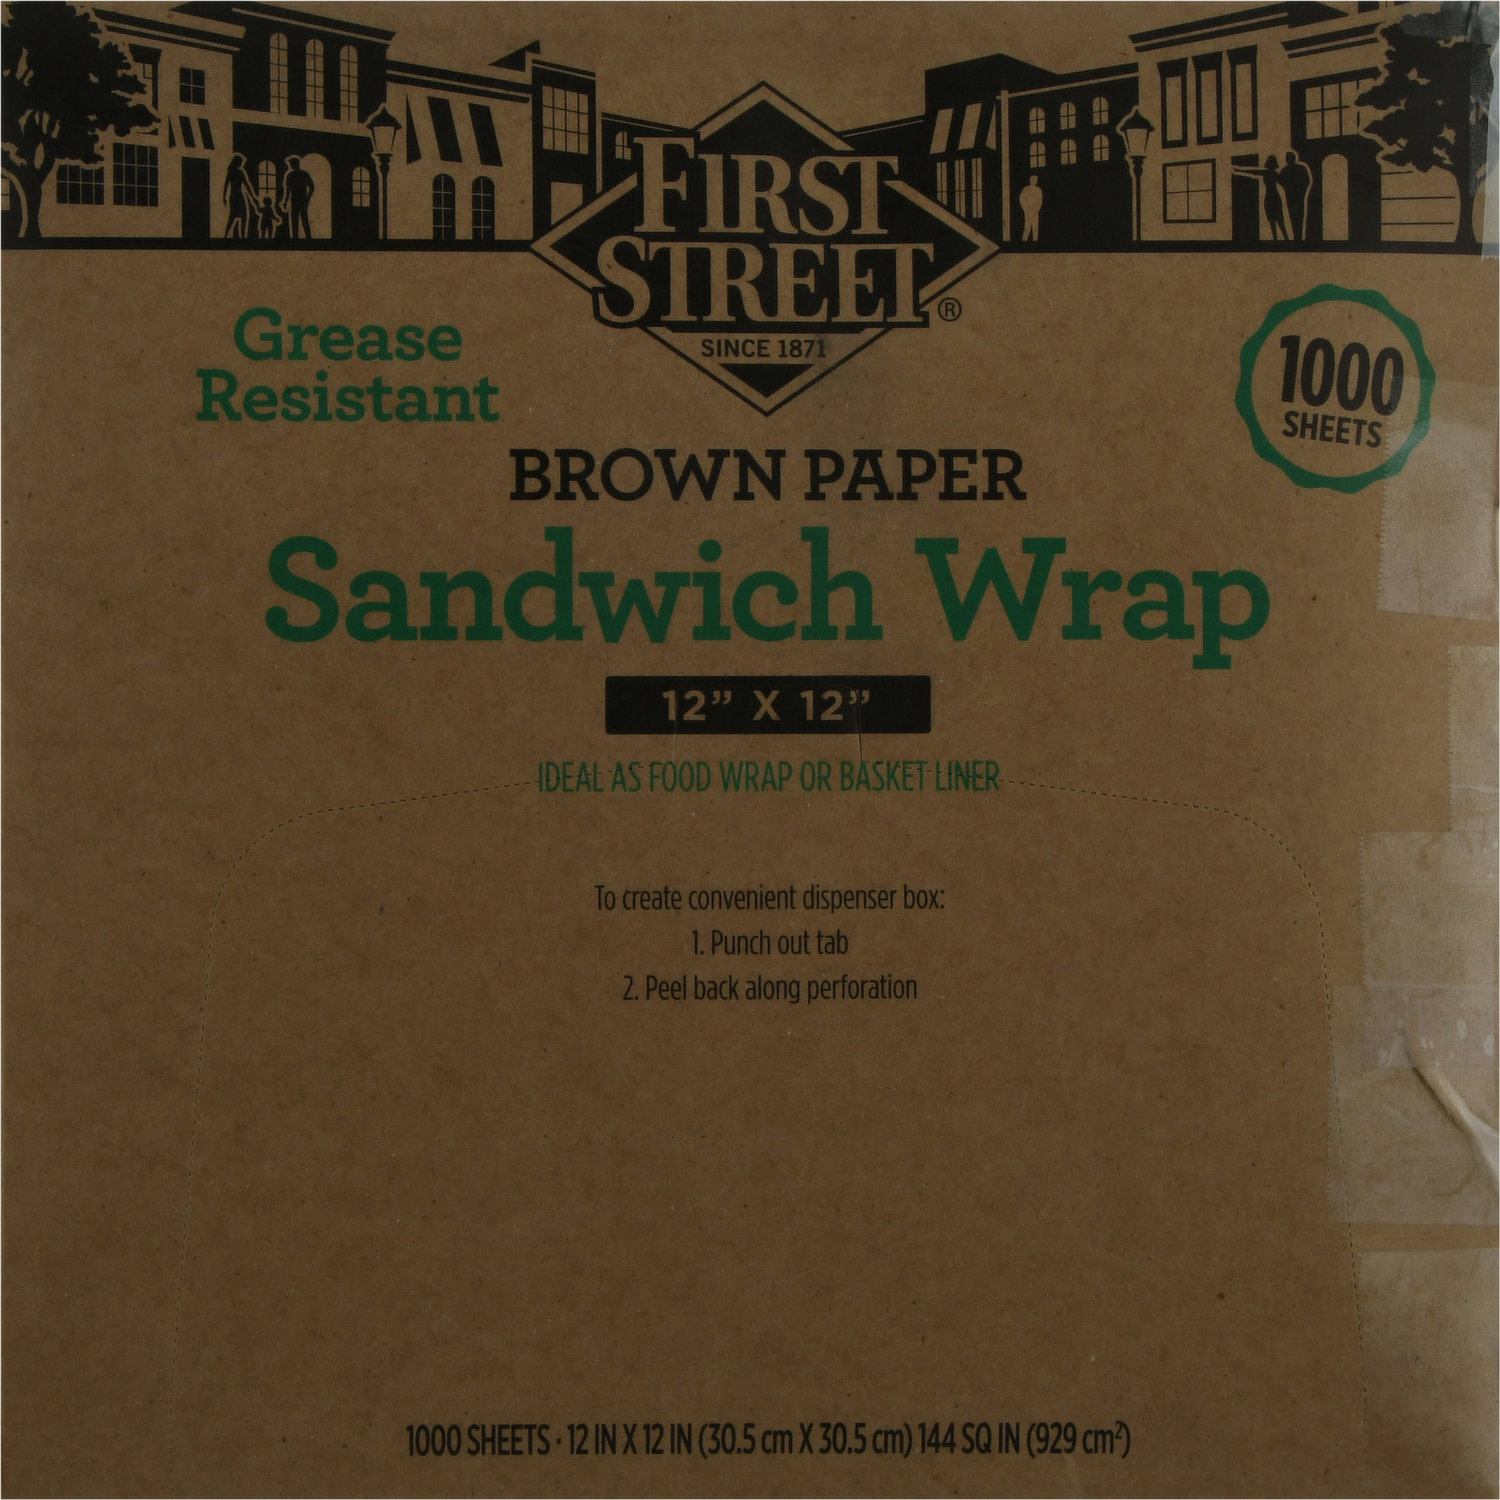 First Street Sandwich Wrap, Brown Paper, Grease Resistant - Smart